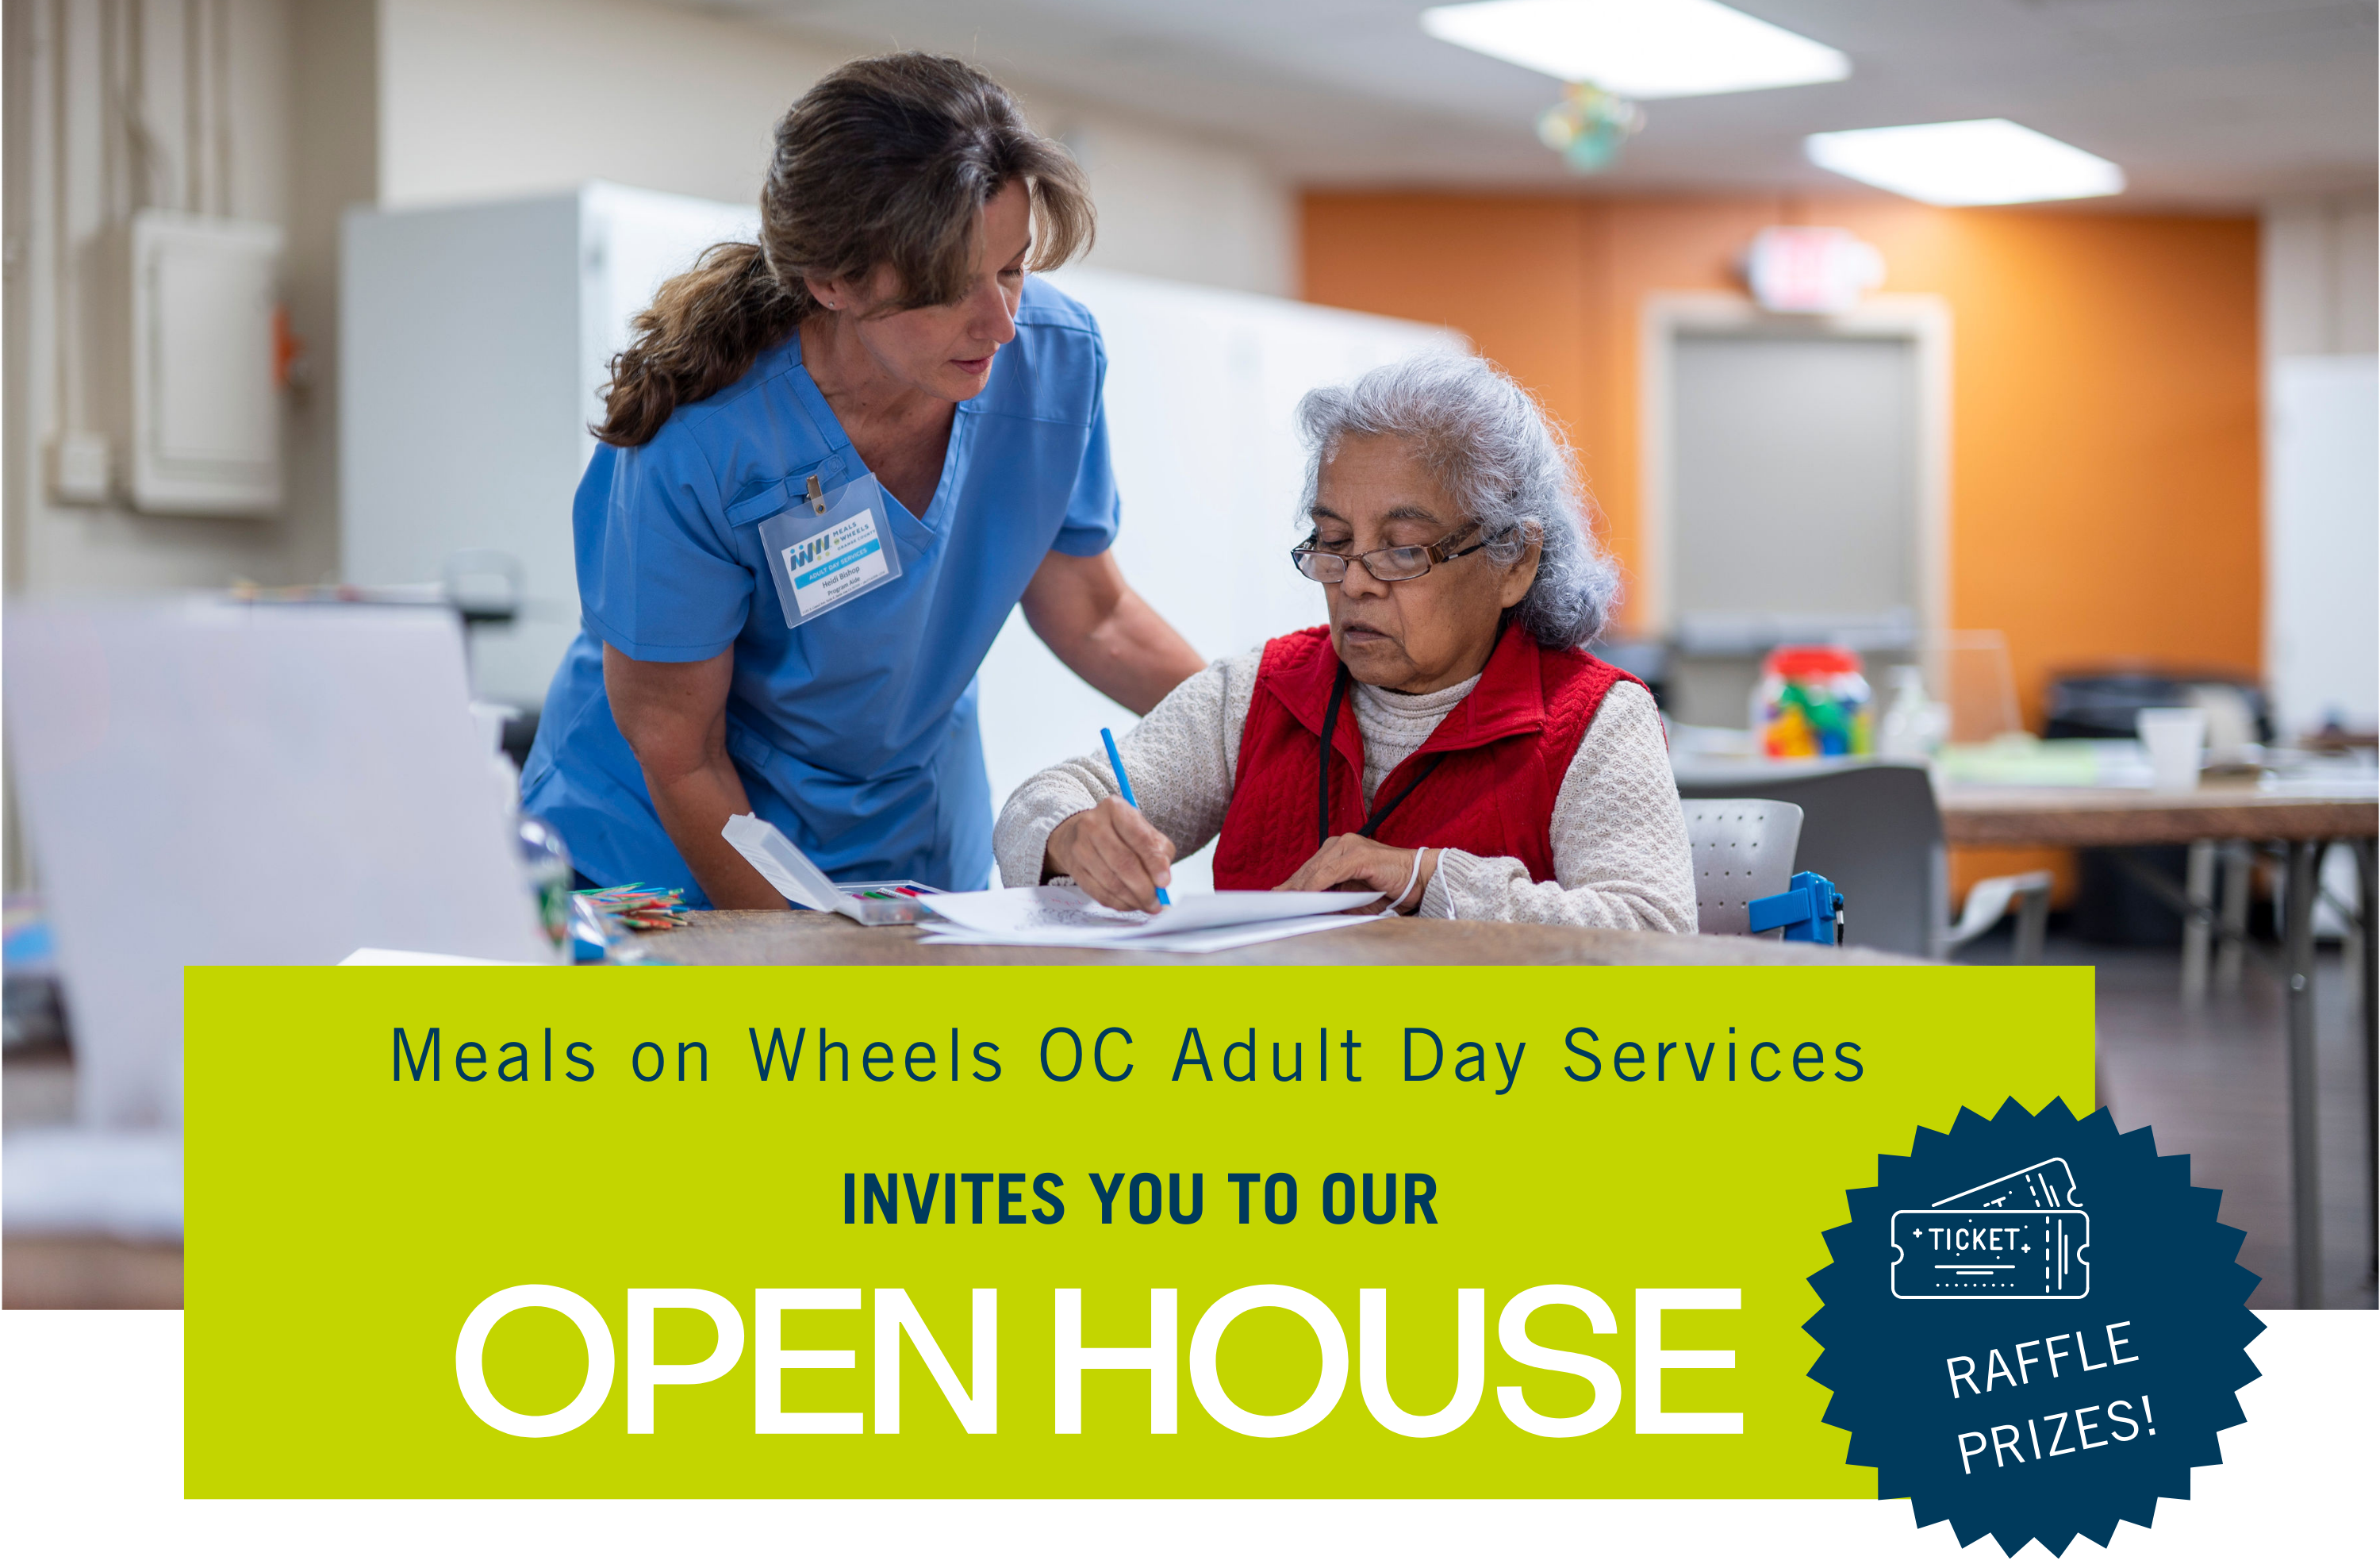 Meals on Wheels OC Adult Day Services Invites You To Our Open House!